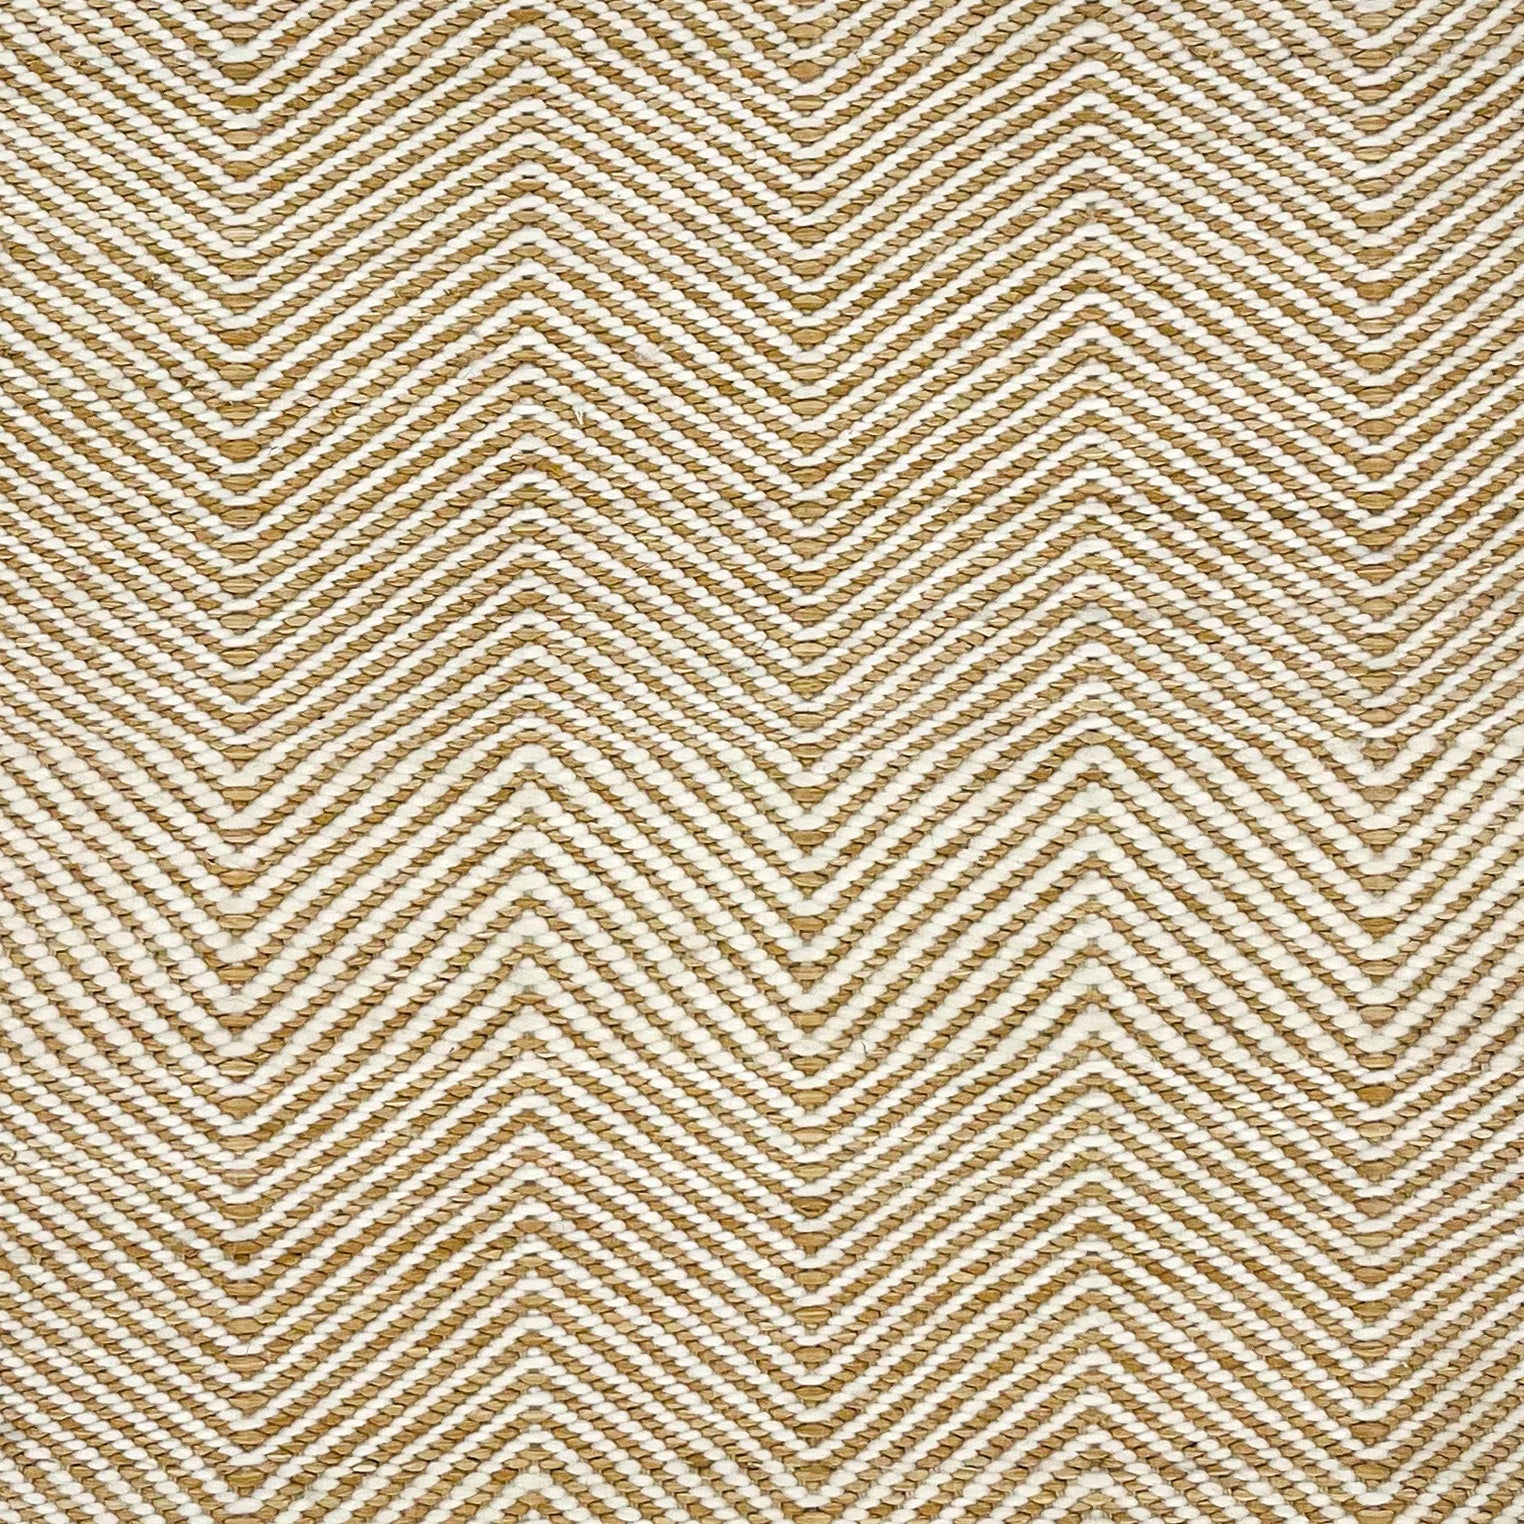 Woven rug swatch with thin chevron pattern in white and taupe